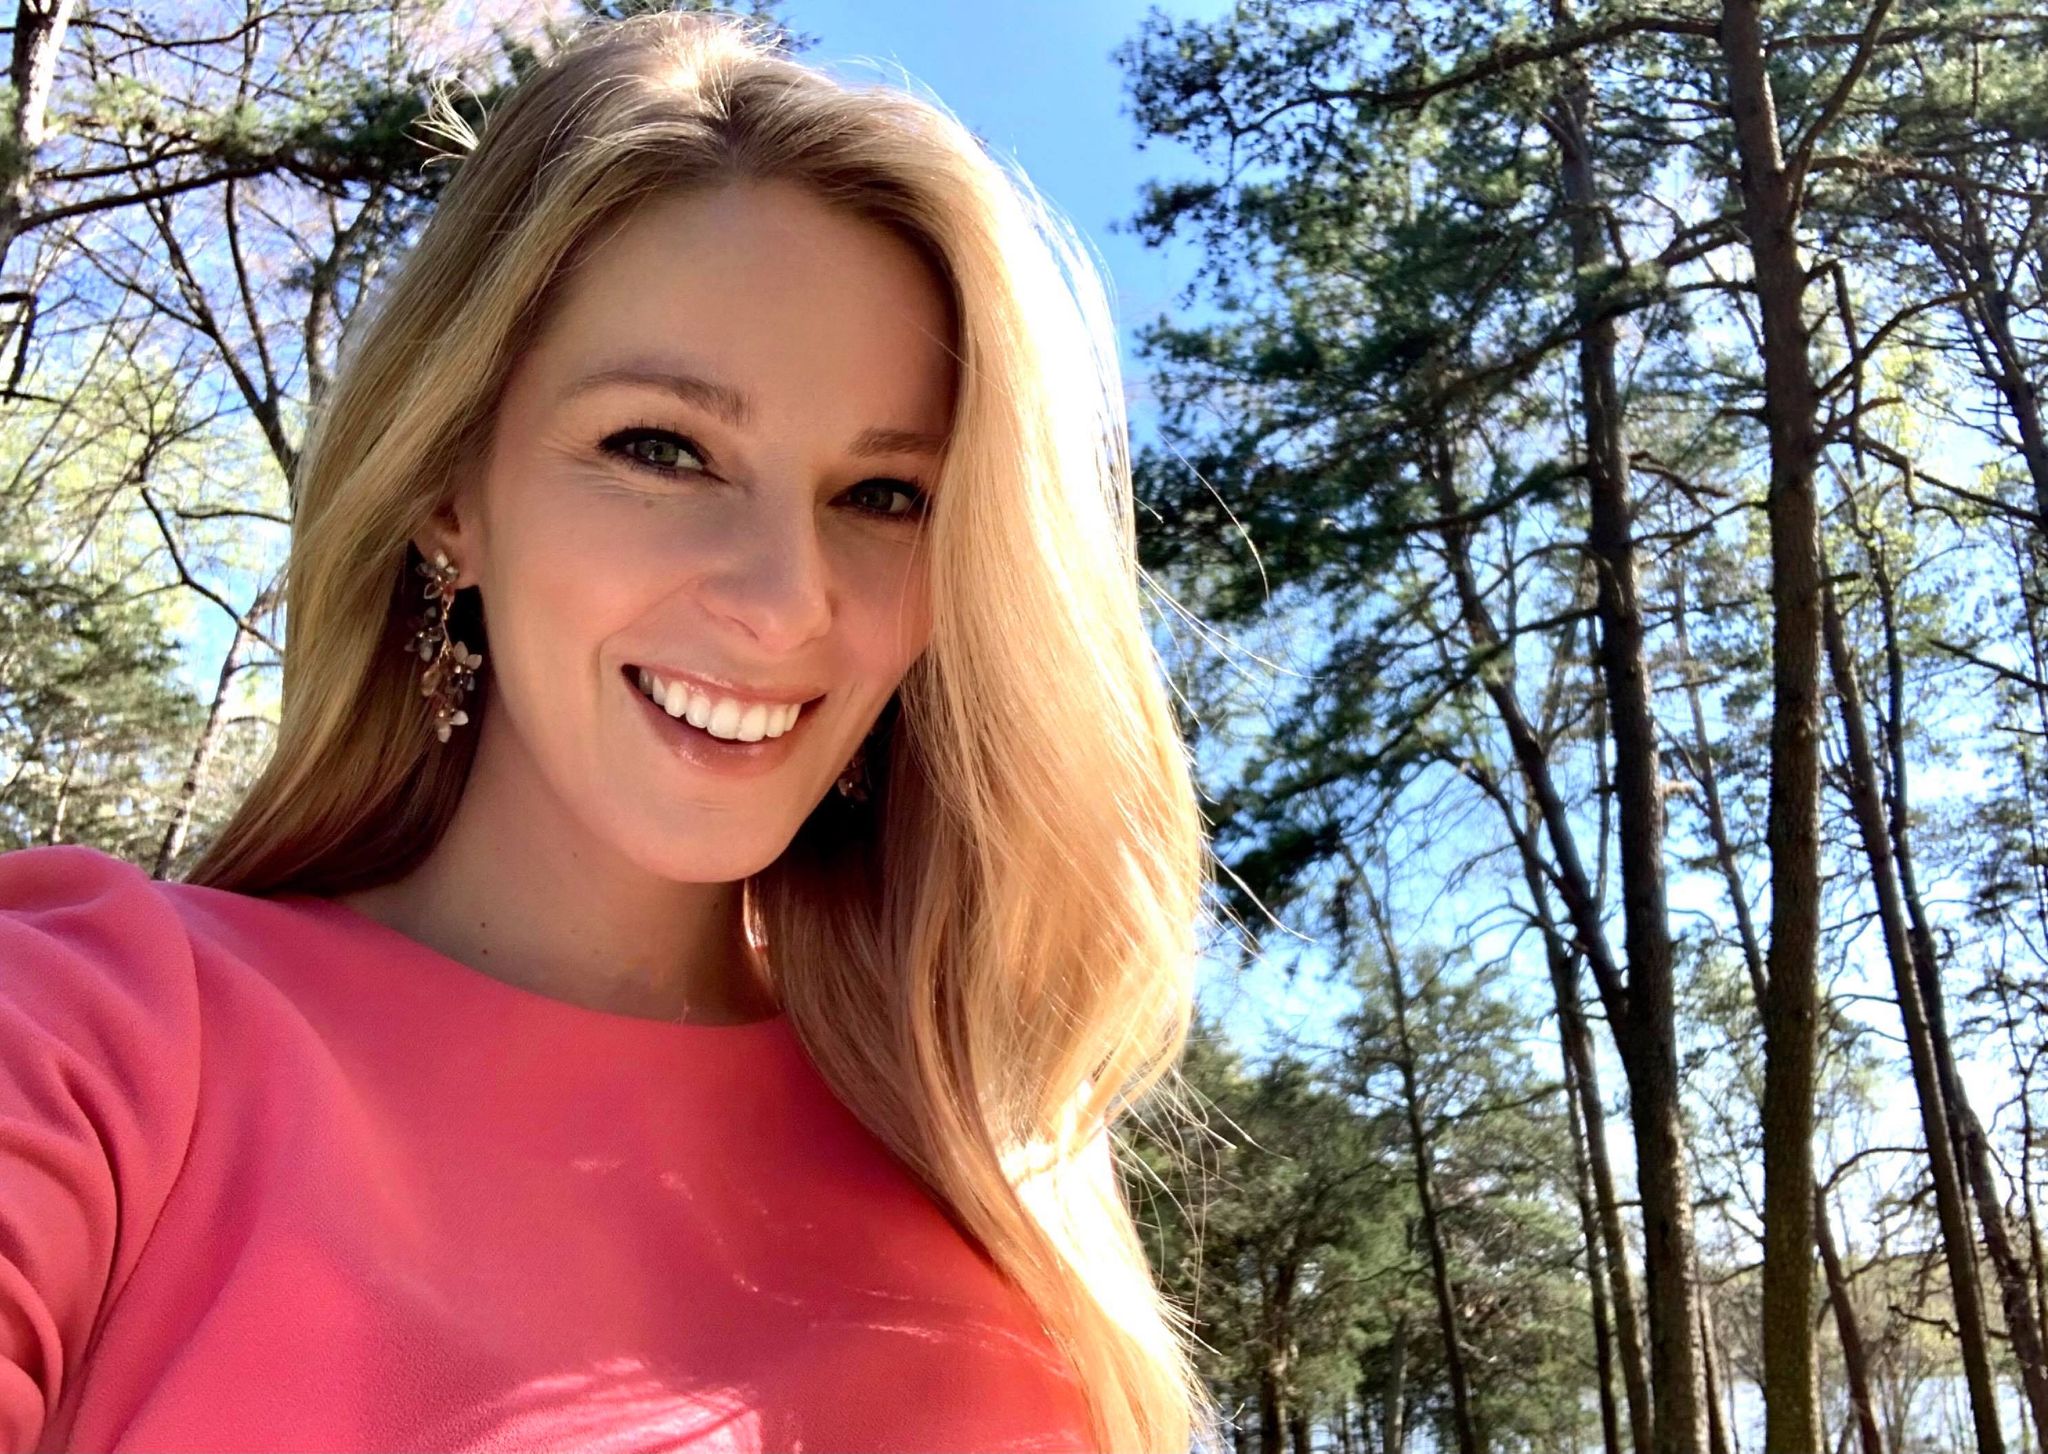 Weekend Weather View With Kaitlin Wccb Charlotte S Cw